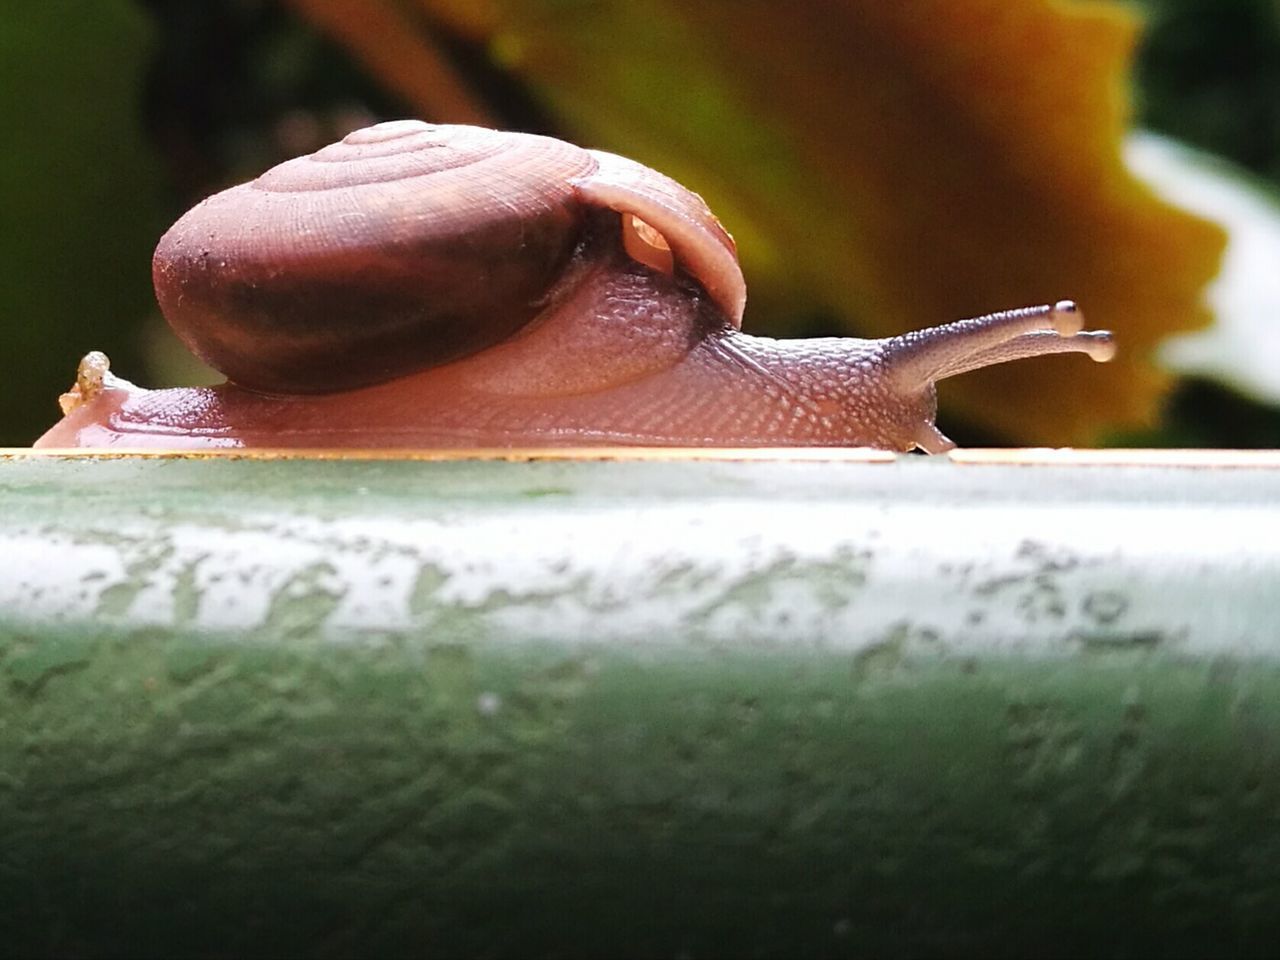 CLOSE-UP OF SNAIL ON GREEN SURFACE